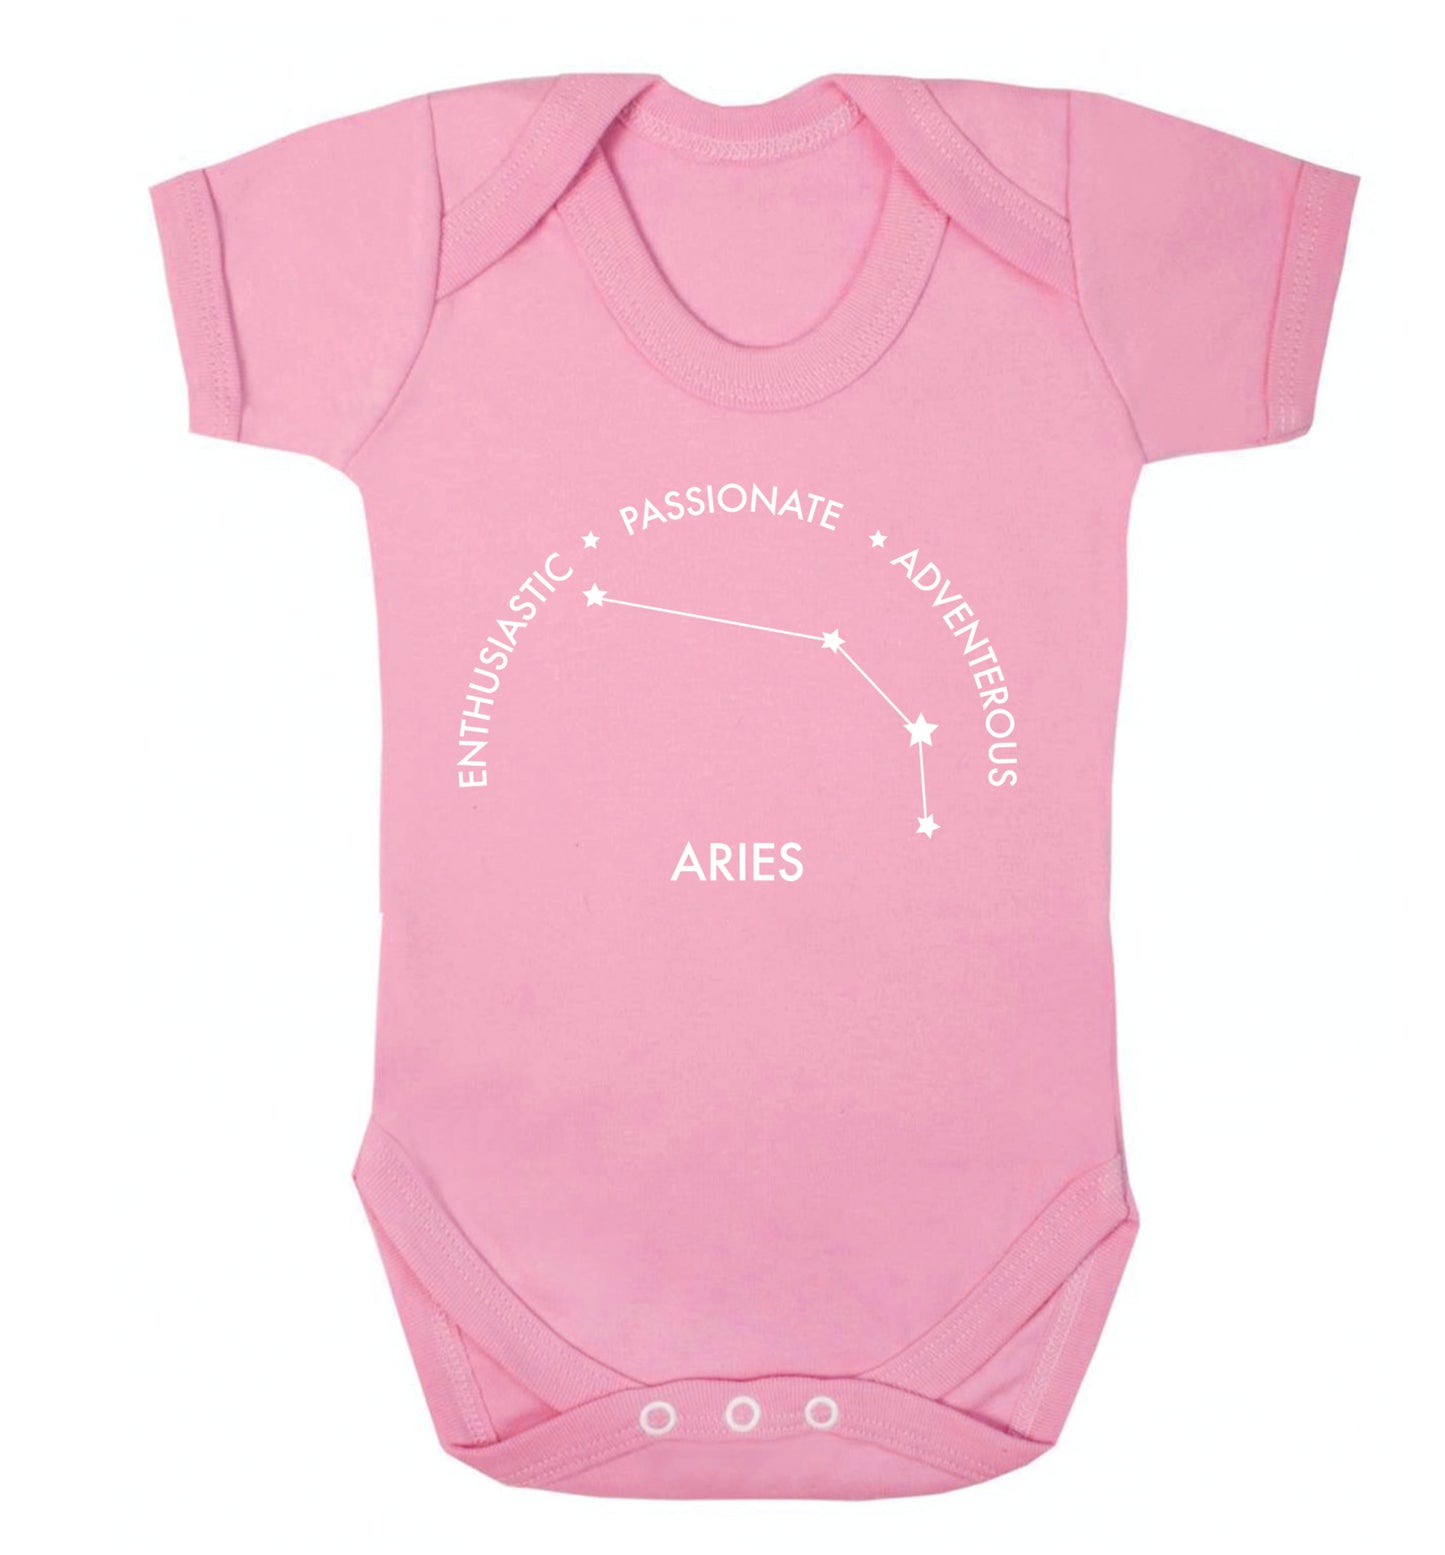 Aries enthusiastic | passionate | adventerous Baby Vest pale pink 18-24 months